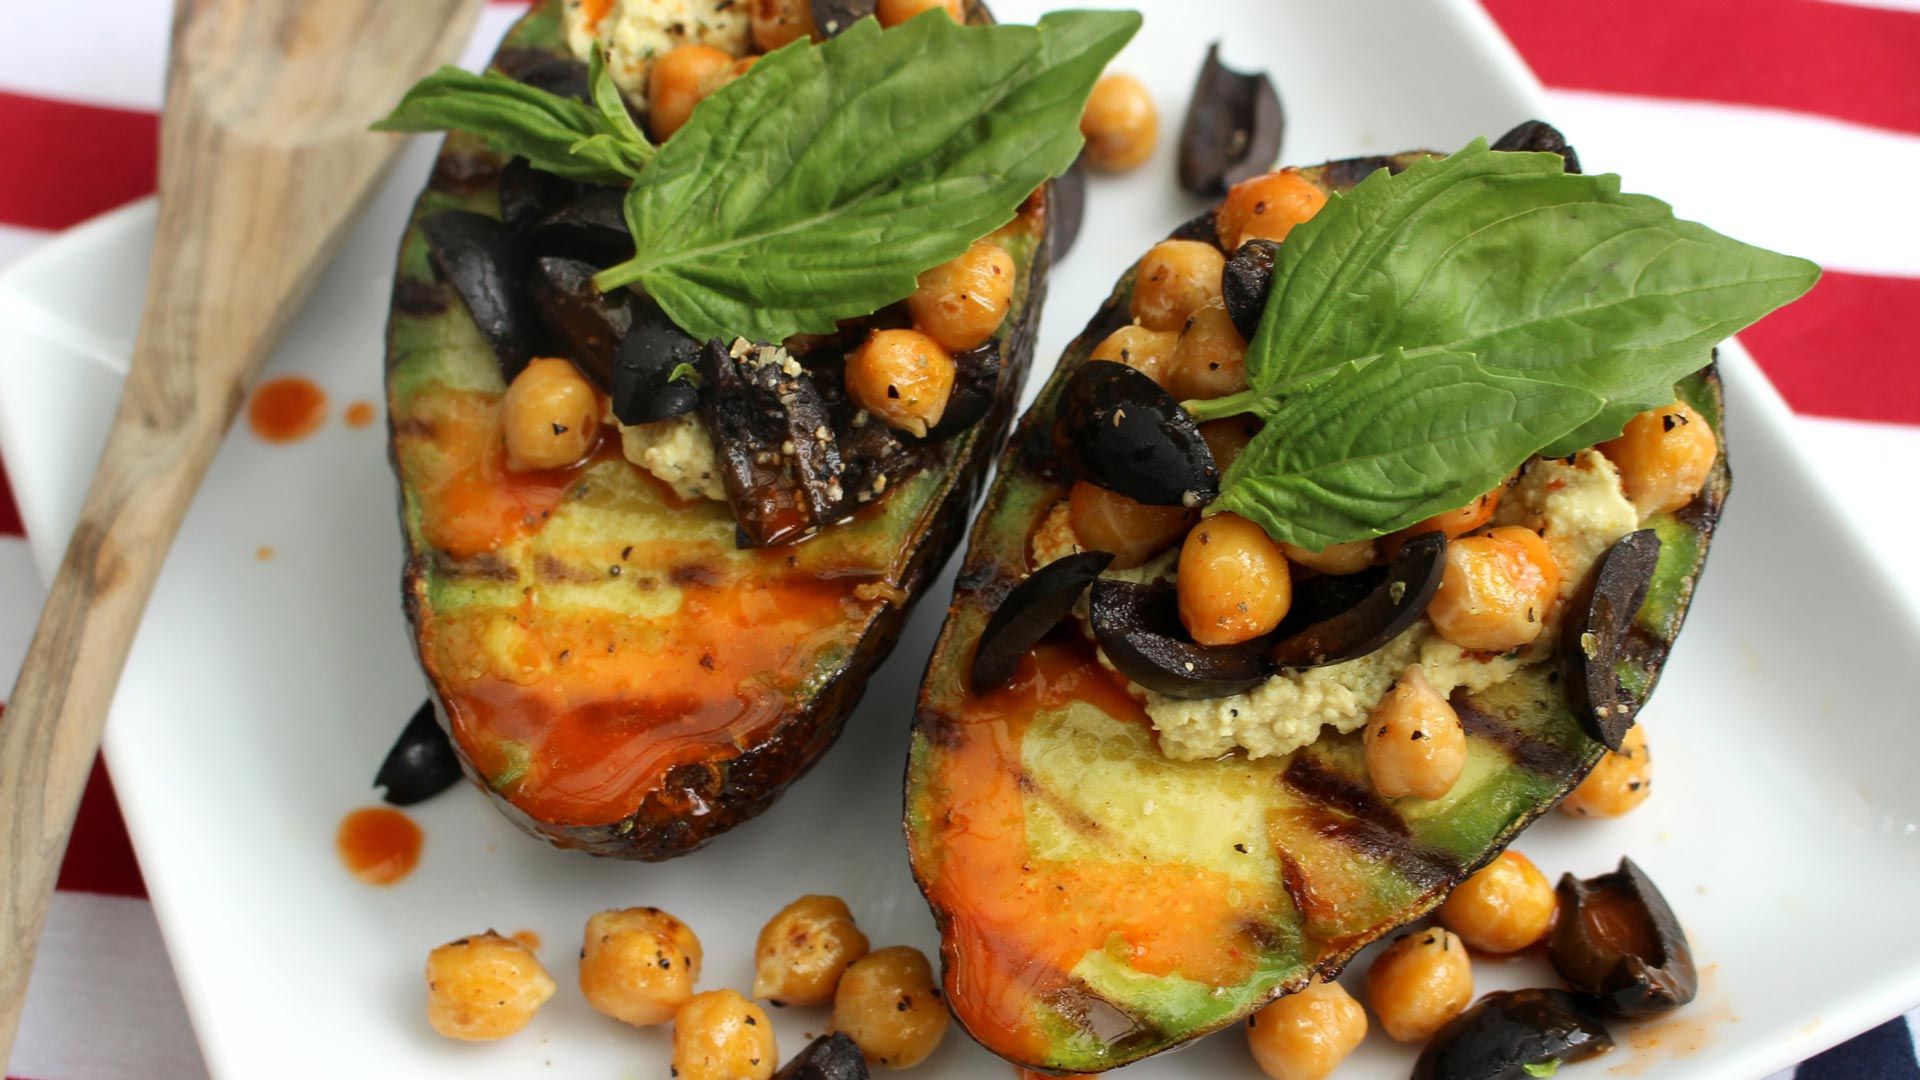 grilled avocado stuffed with Toby's plant based dip & spread, chickpeas and olives